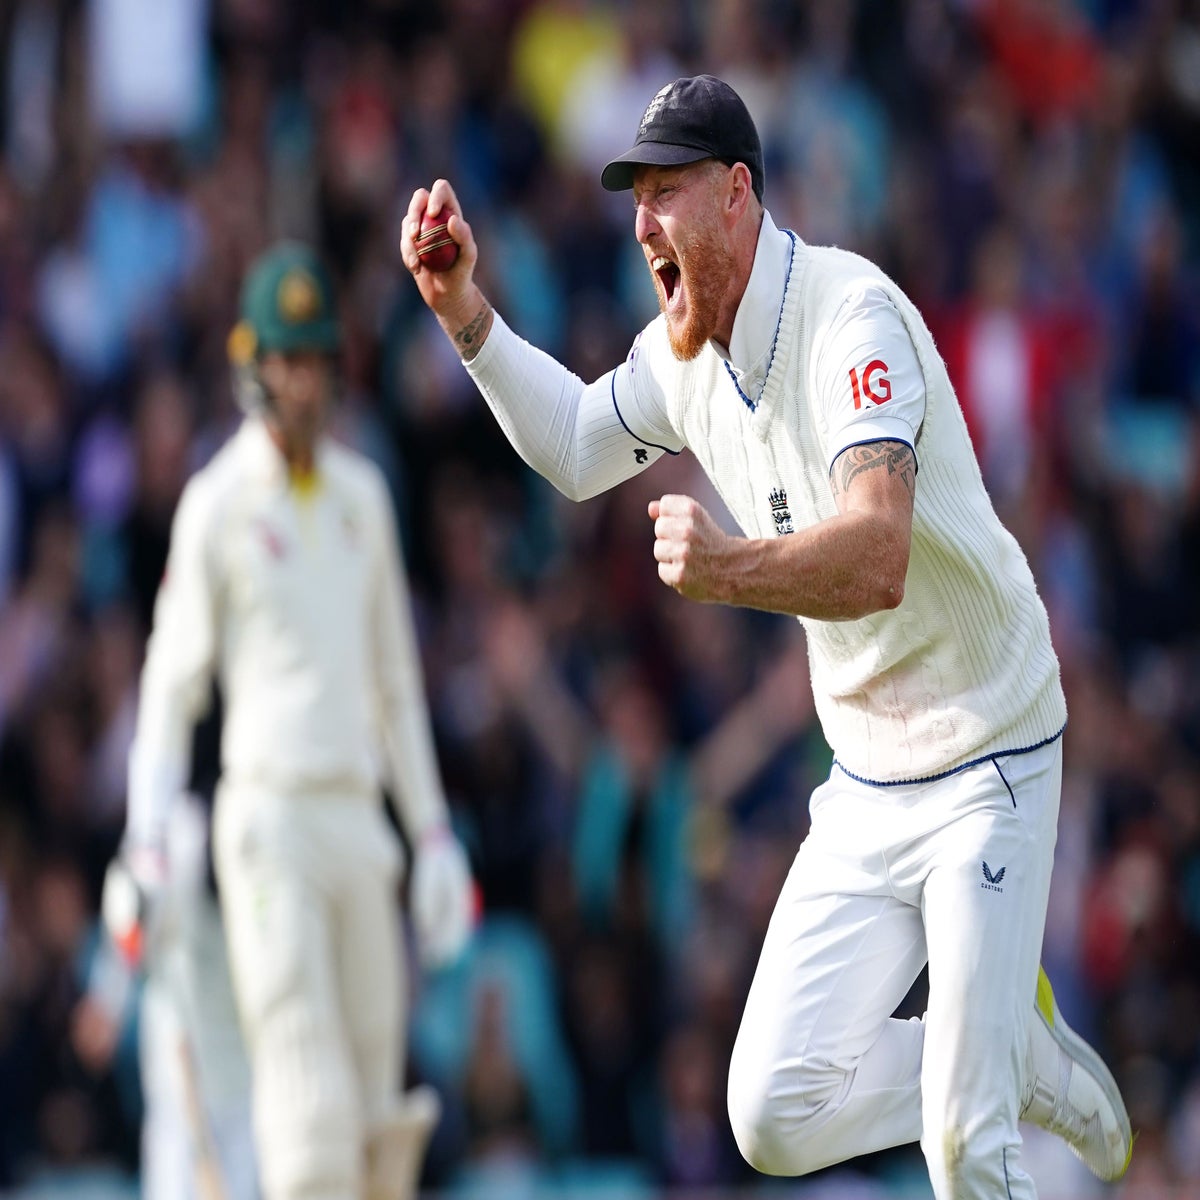 Ashes 2023 [WATCH]: Ben Stokes pulls off a marvellous catch to dismiss Pat  Cummins on Day 2 of the Oval Test